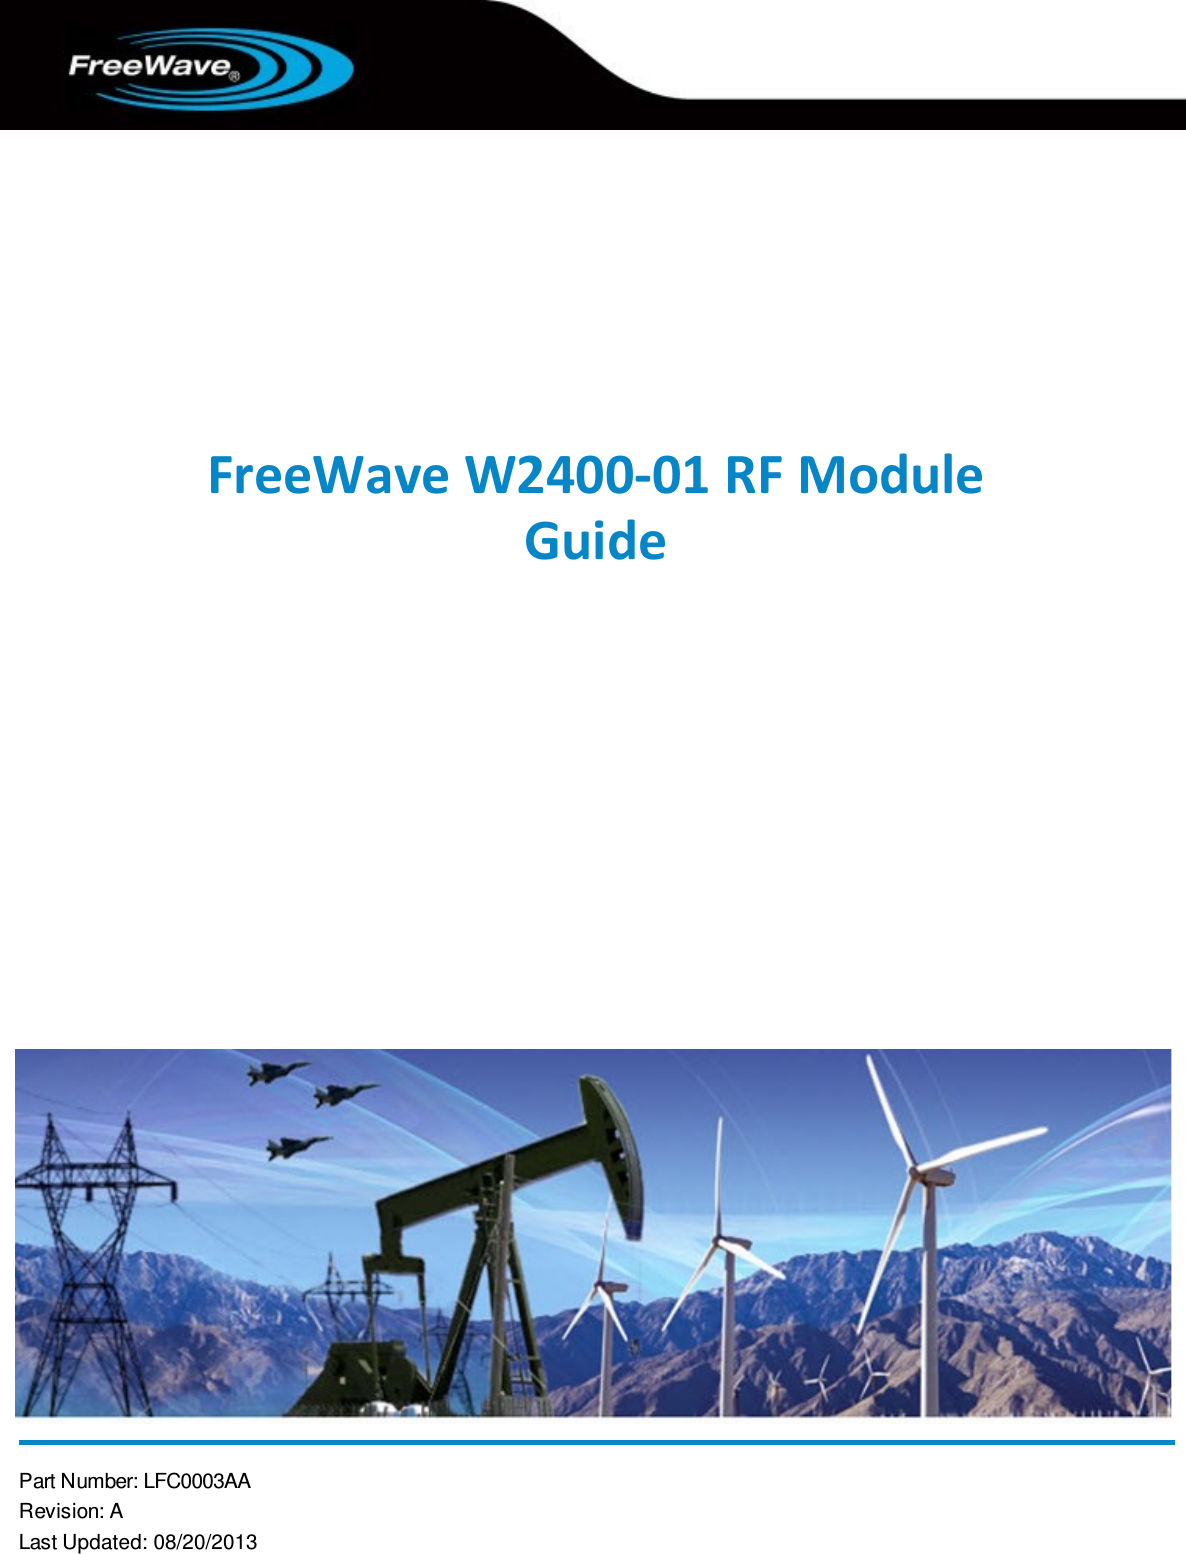  Part Number: LFC0003AA Revision: A Last Updated: 08/20/2013    FreeWave W2400-01 RF Module Guide  